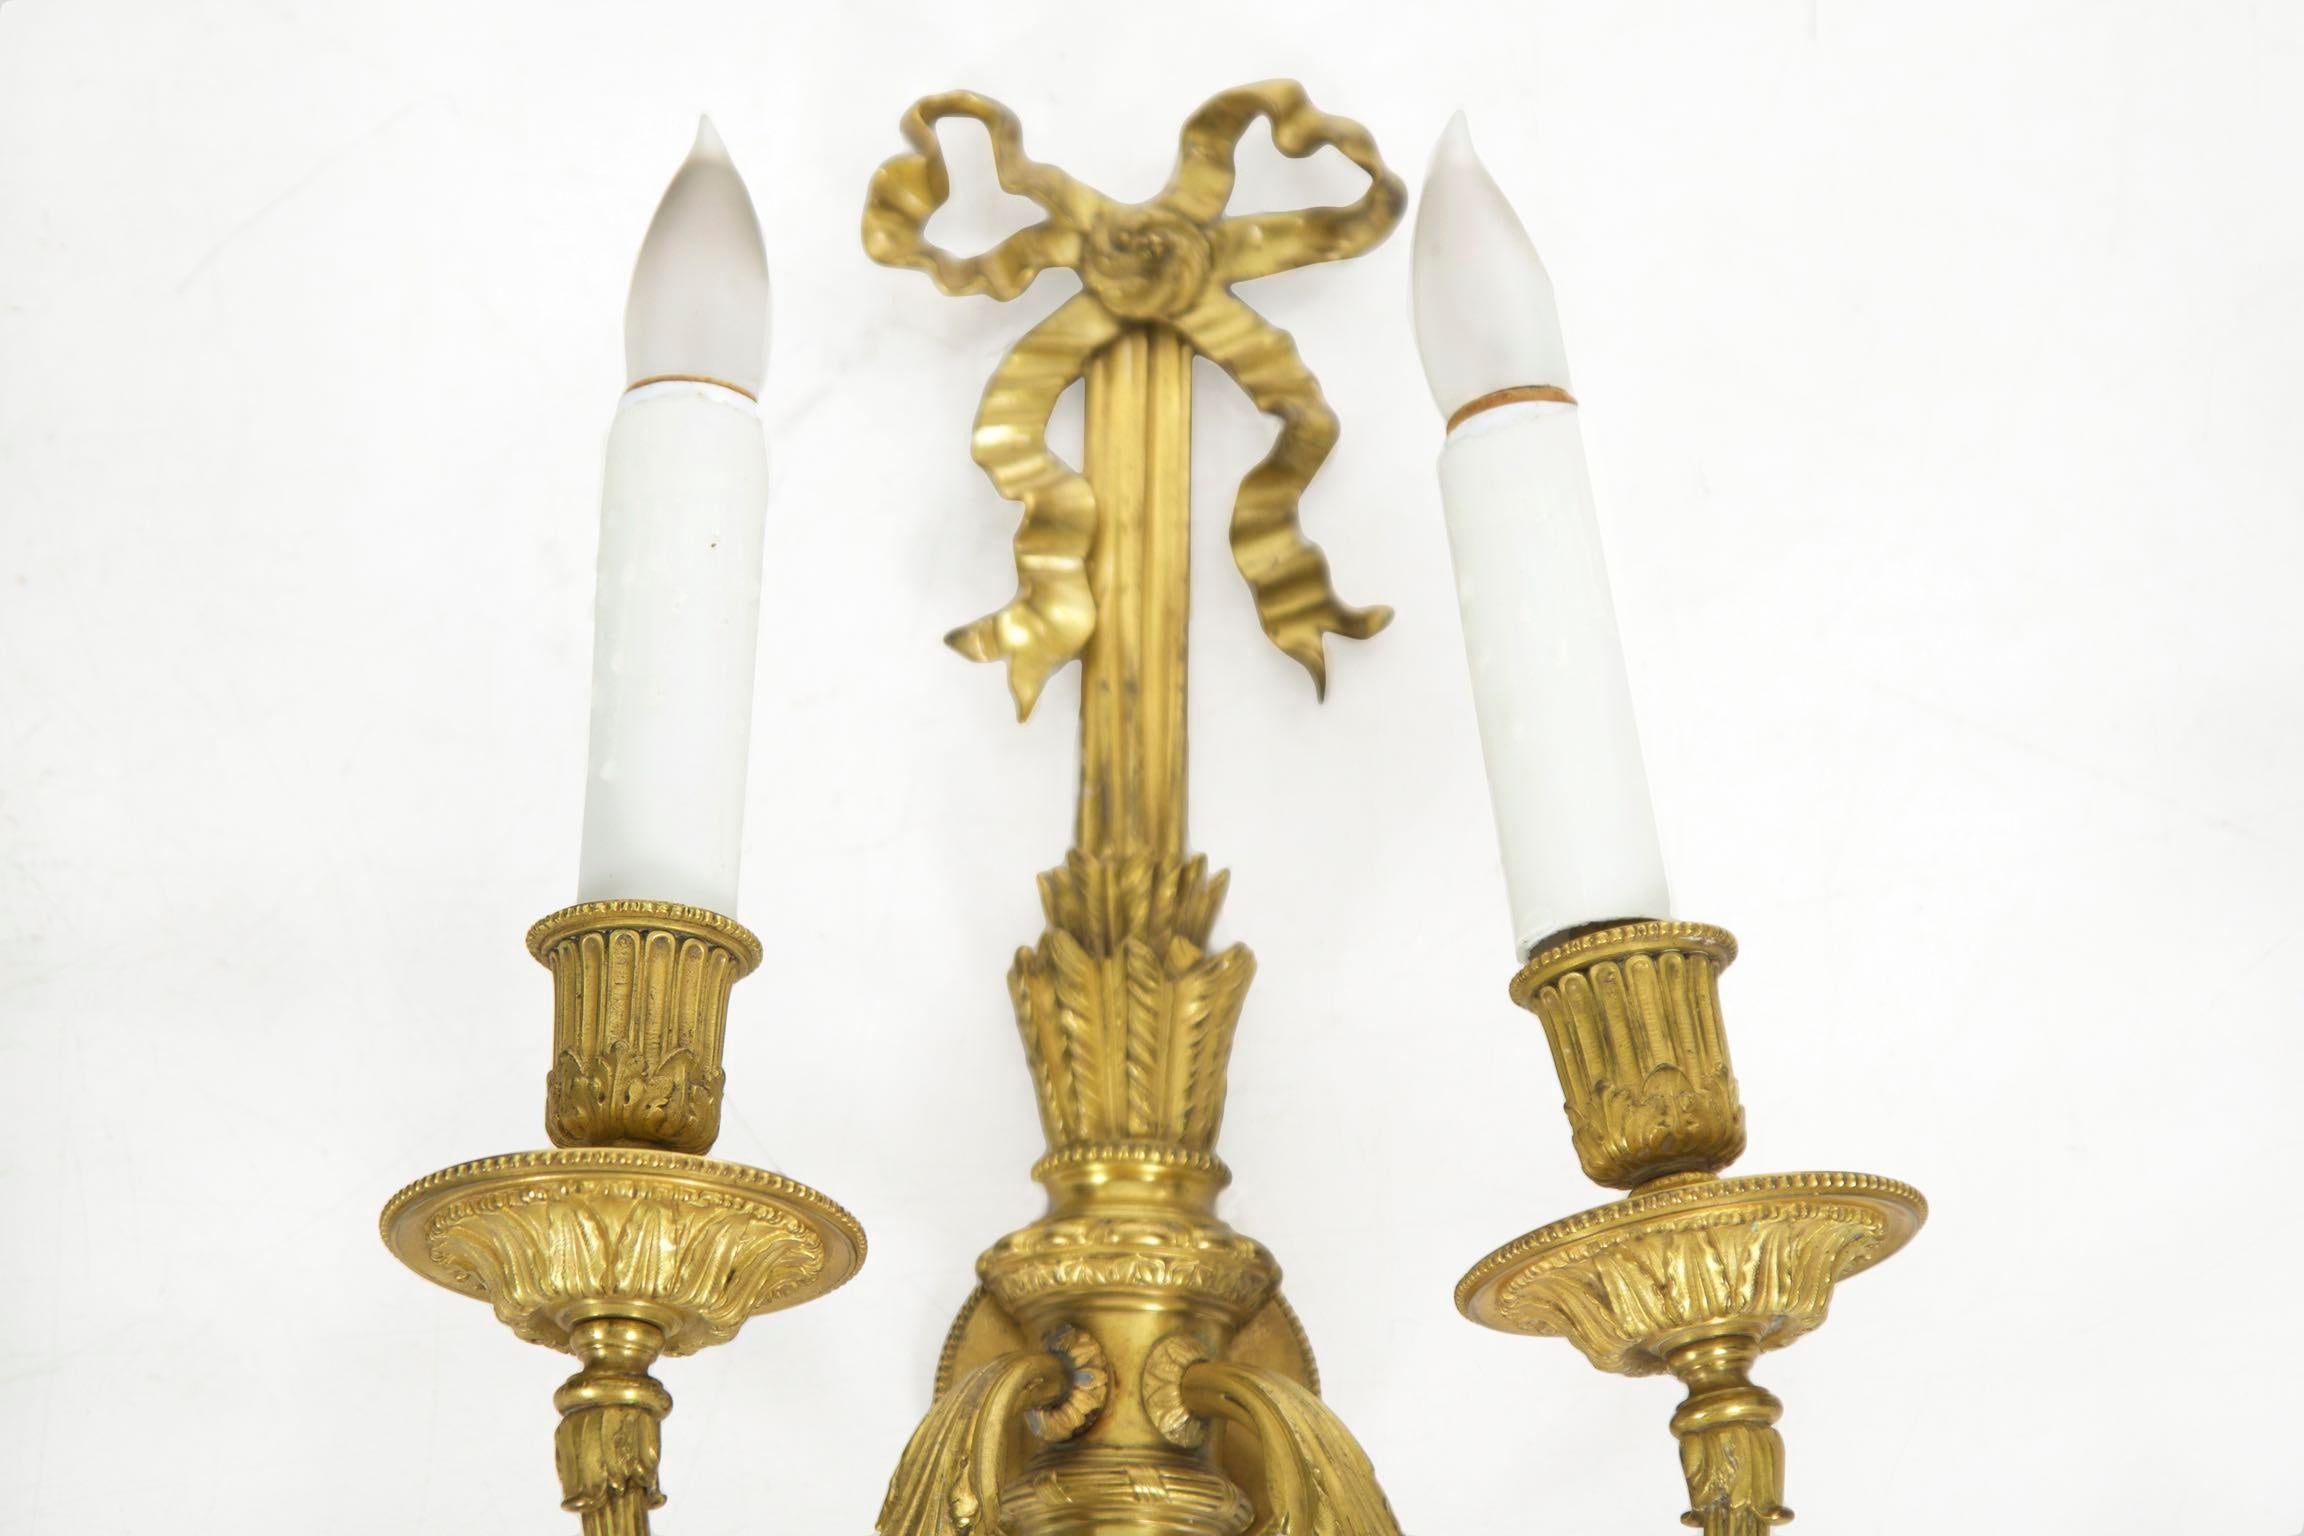 This is an exceptionally well cast gilt bronze wall sconce in the taste of the Louis XVI period, likely crafted during the last quarter of the 19th century. The careful chiseling of all surfaces is noteworthy, each branch projecting from highly